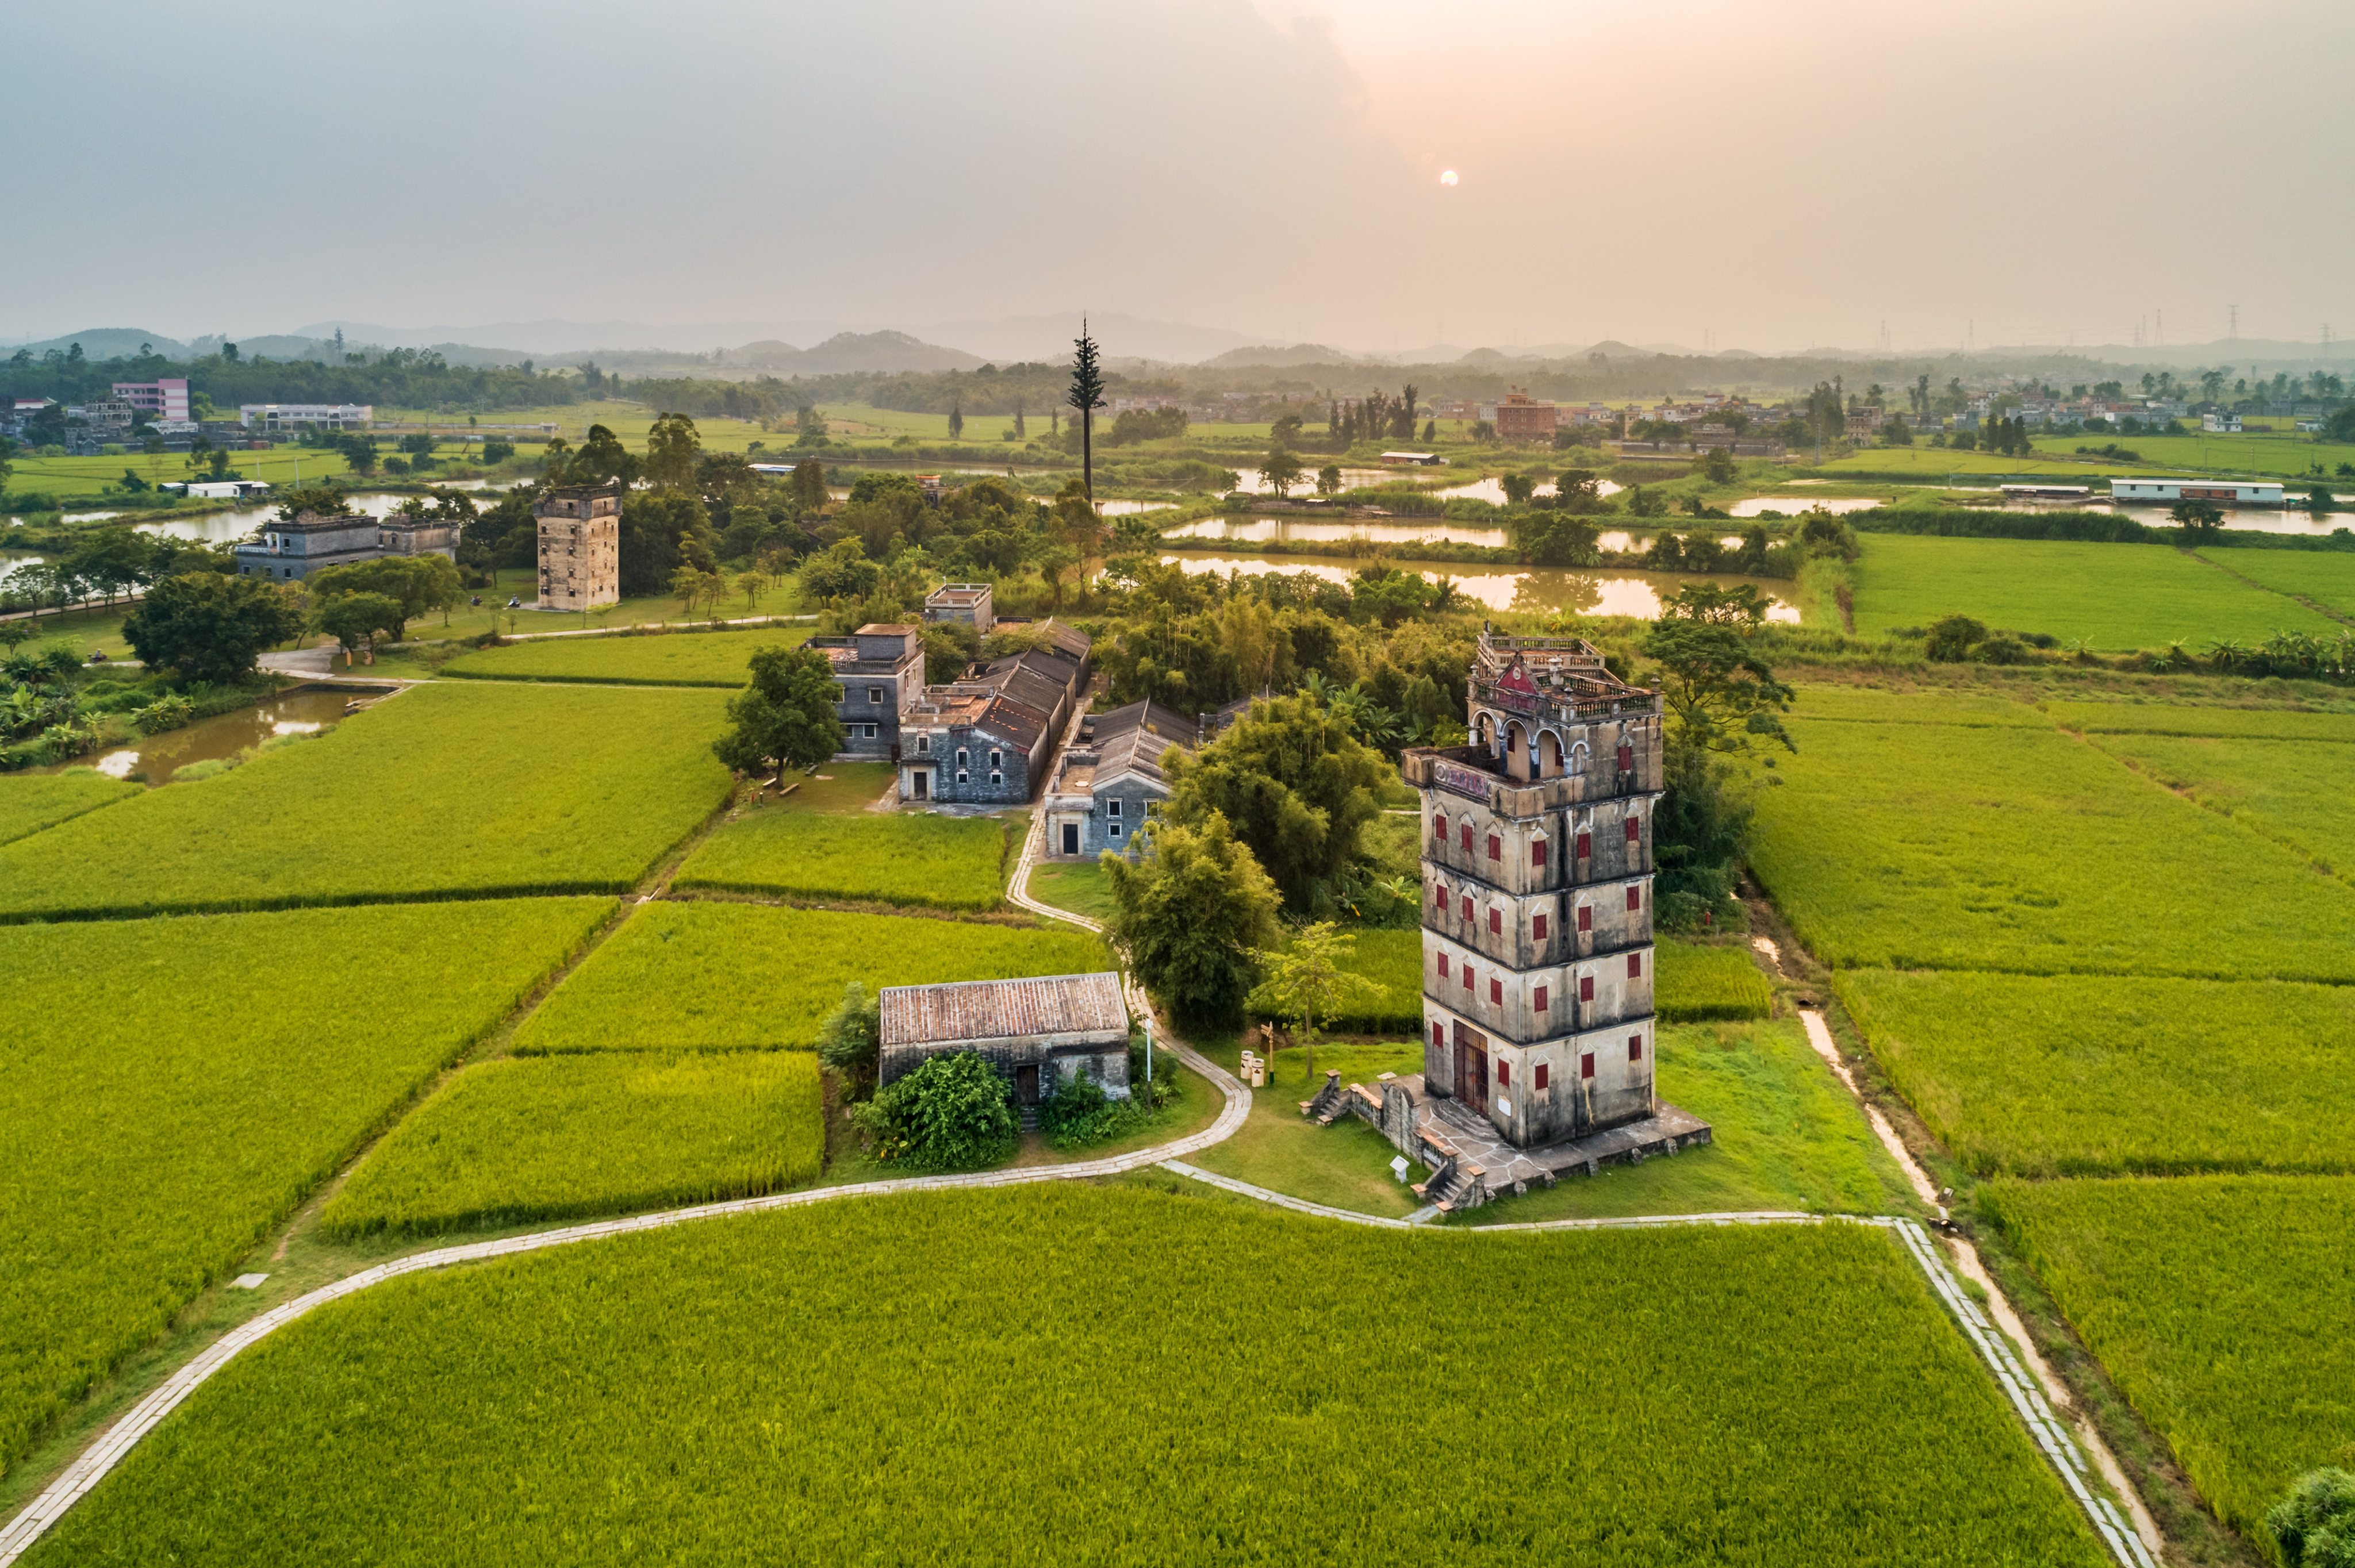 A watchtower in Kaiping, Guangdong province. The Greater Bay Area offers many potential getaway destinations for travellers from Hong Kong. Photo: Getty Images